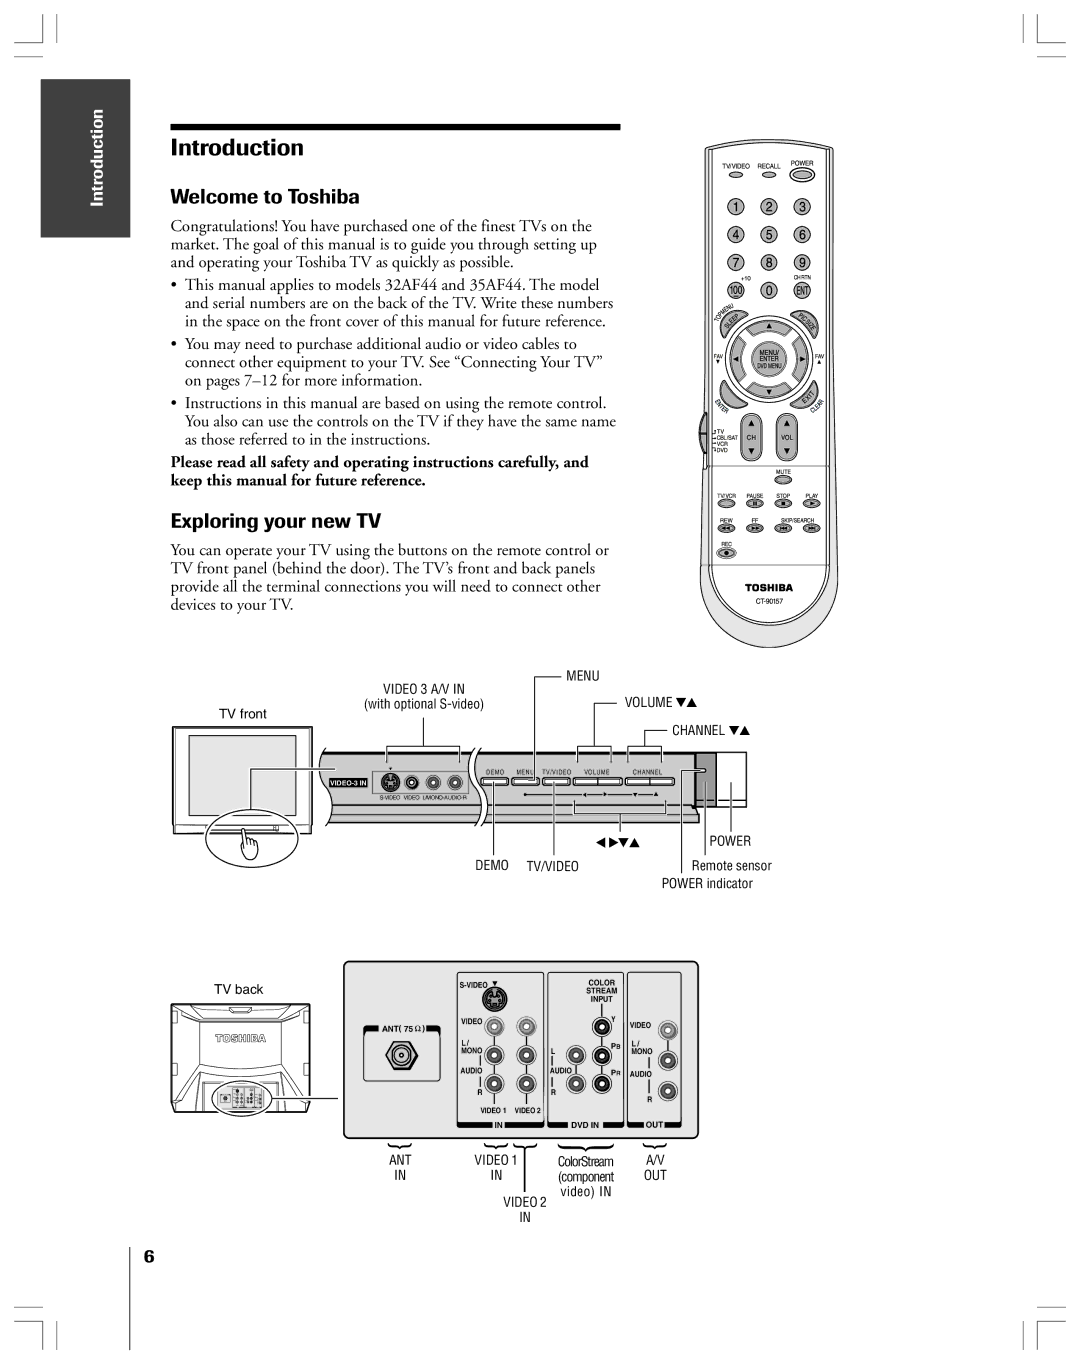 Toshiba 32AF44 owner manual Introduction, Welcome to Toshiba, Exploring your new TV 